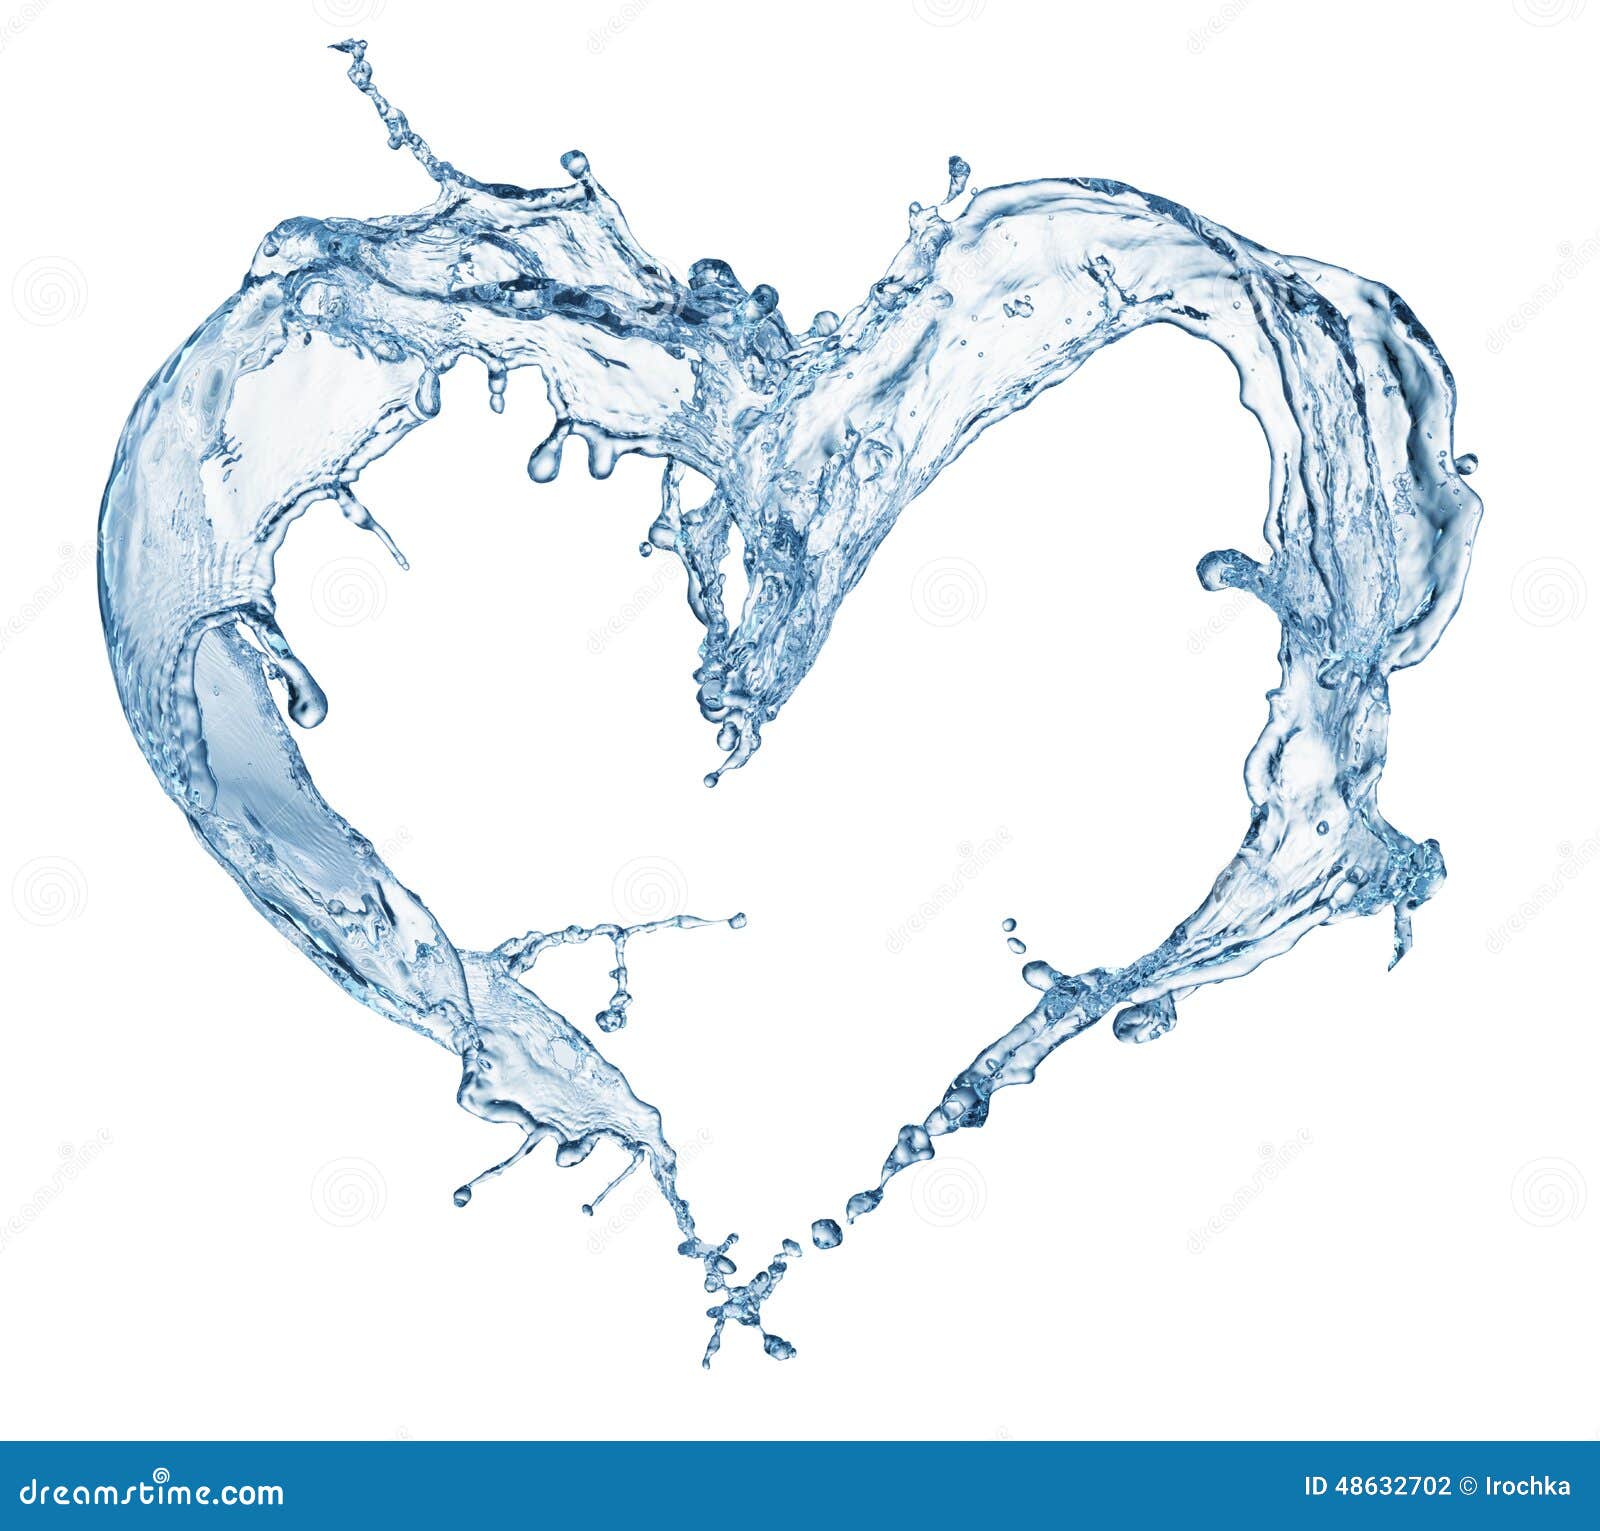 heart from water splash with bubbles